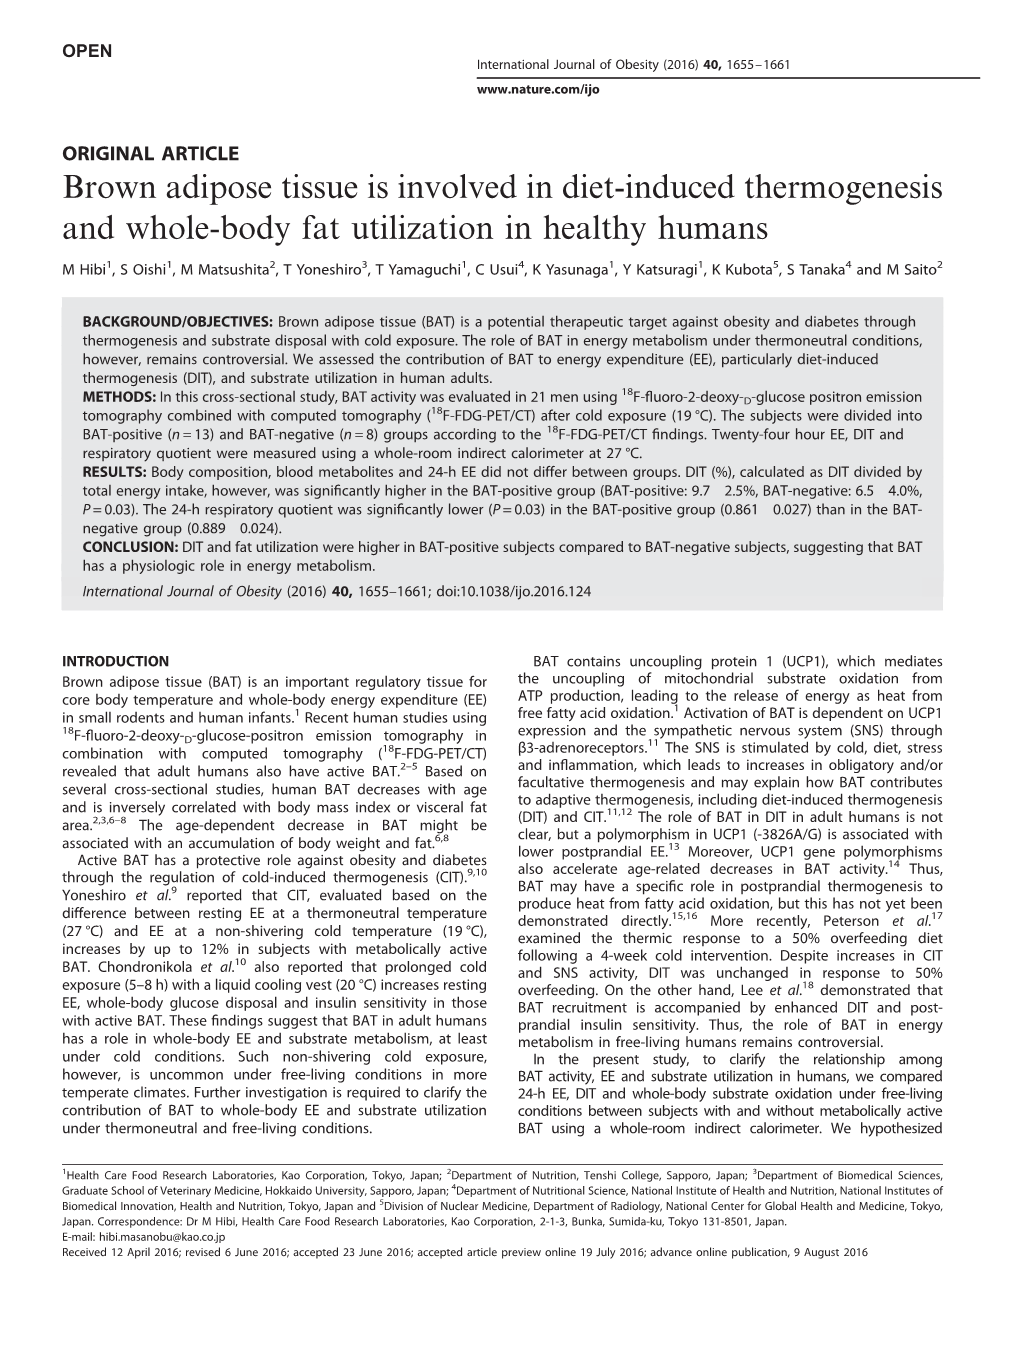 Brown Adipose Tissue Is Involved in Diet-Induced Thermogenesis and Whole-Body Fat Utilization in Healthy Humans